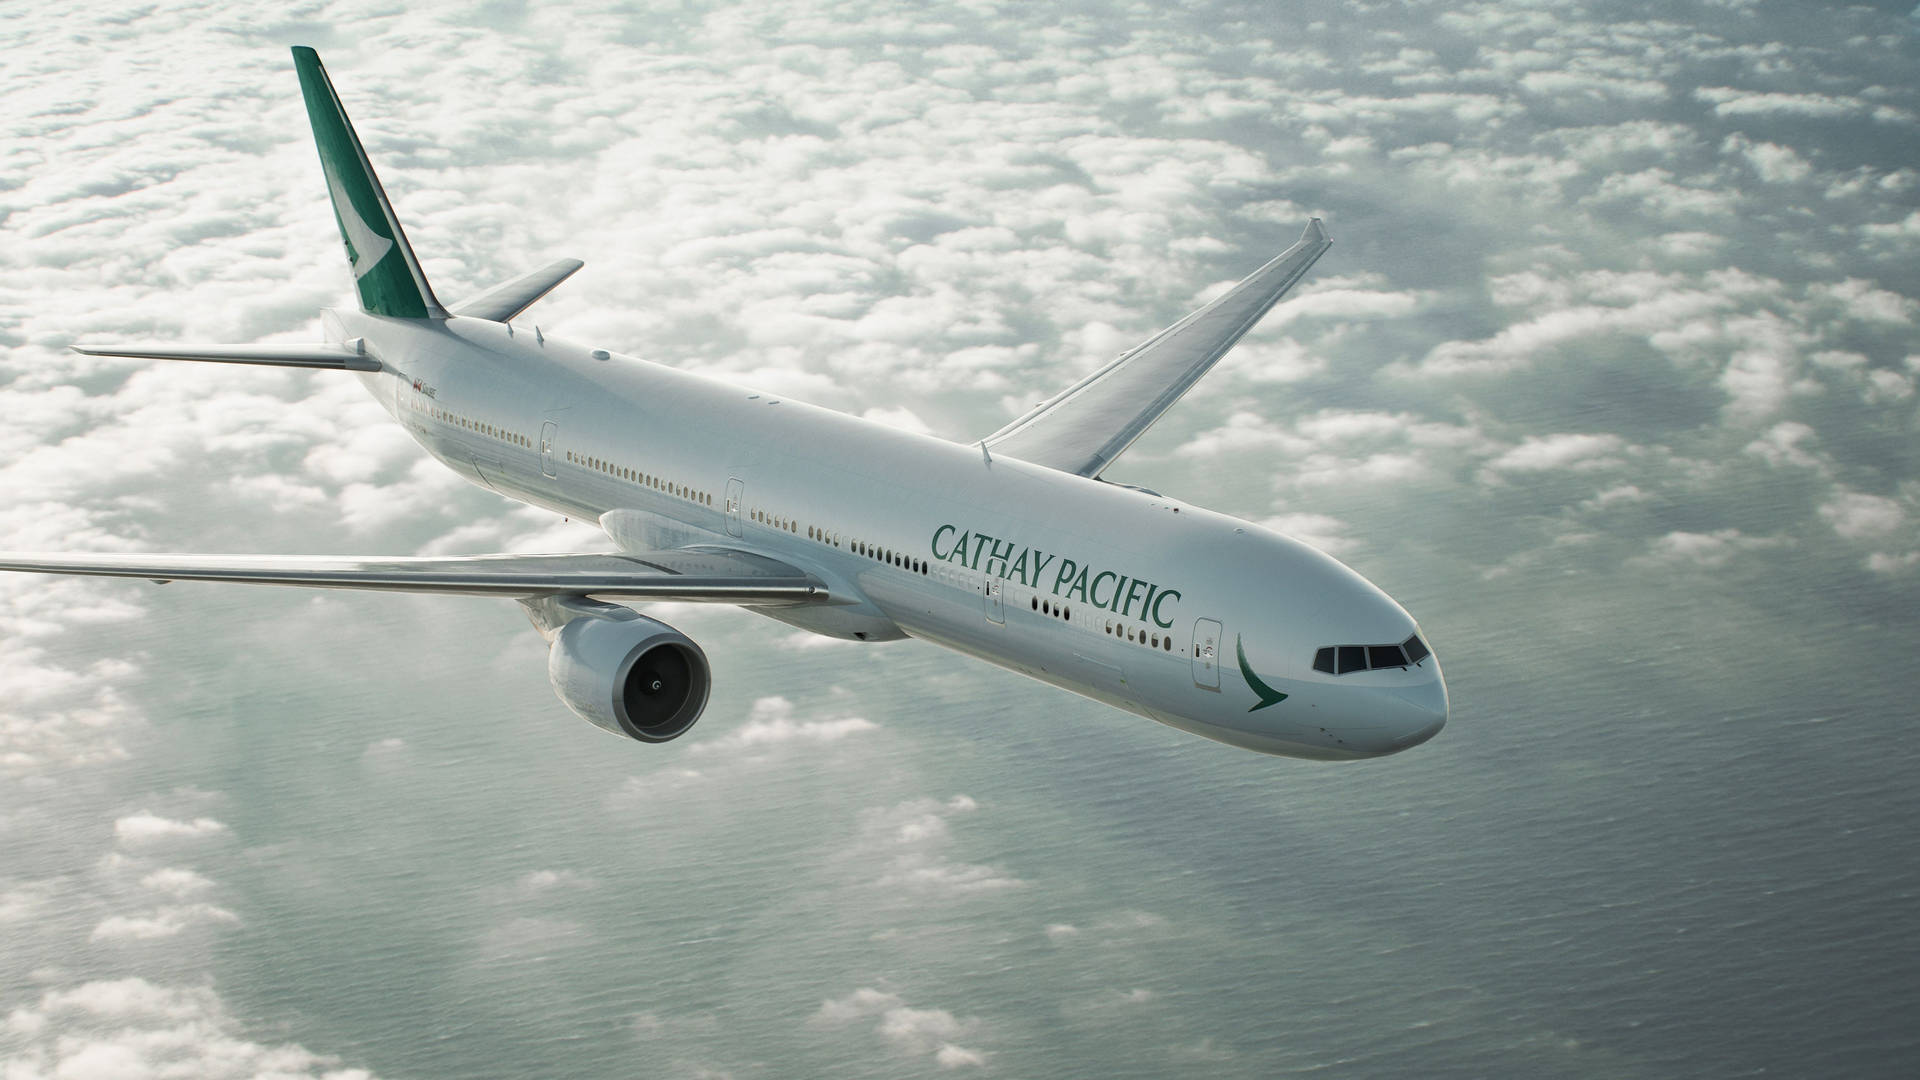 Blue Green Plane Cathay Pacific Wallpaper